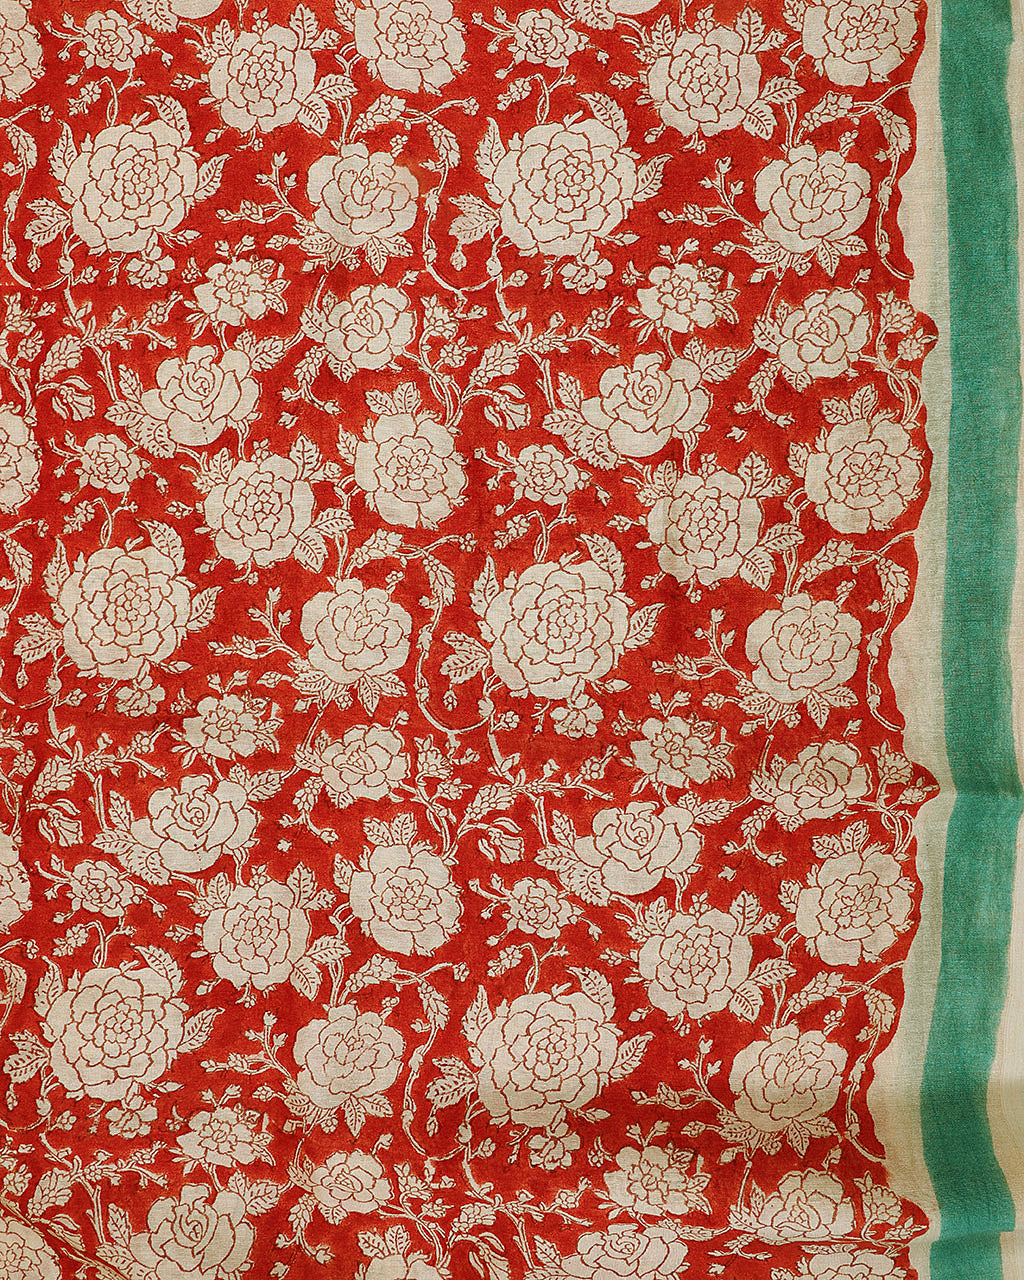 Authentic Red & Turquoise hand block printed chanderi suit with chanderi dupatta